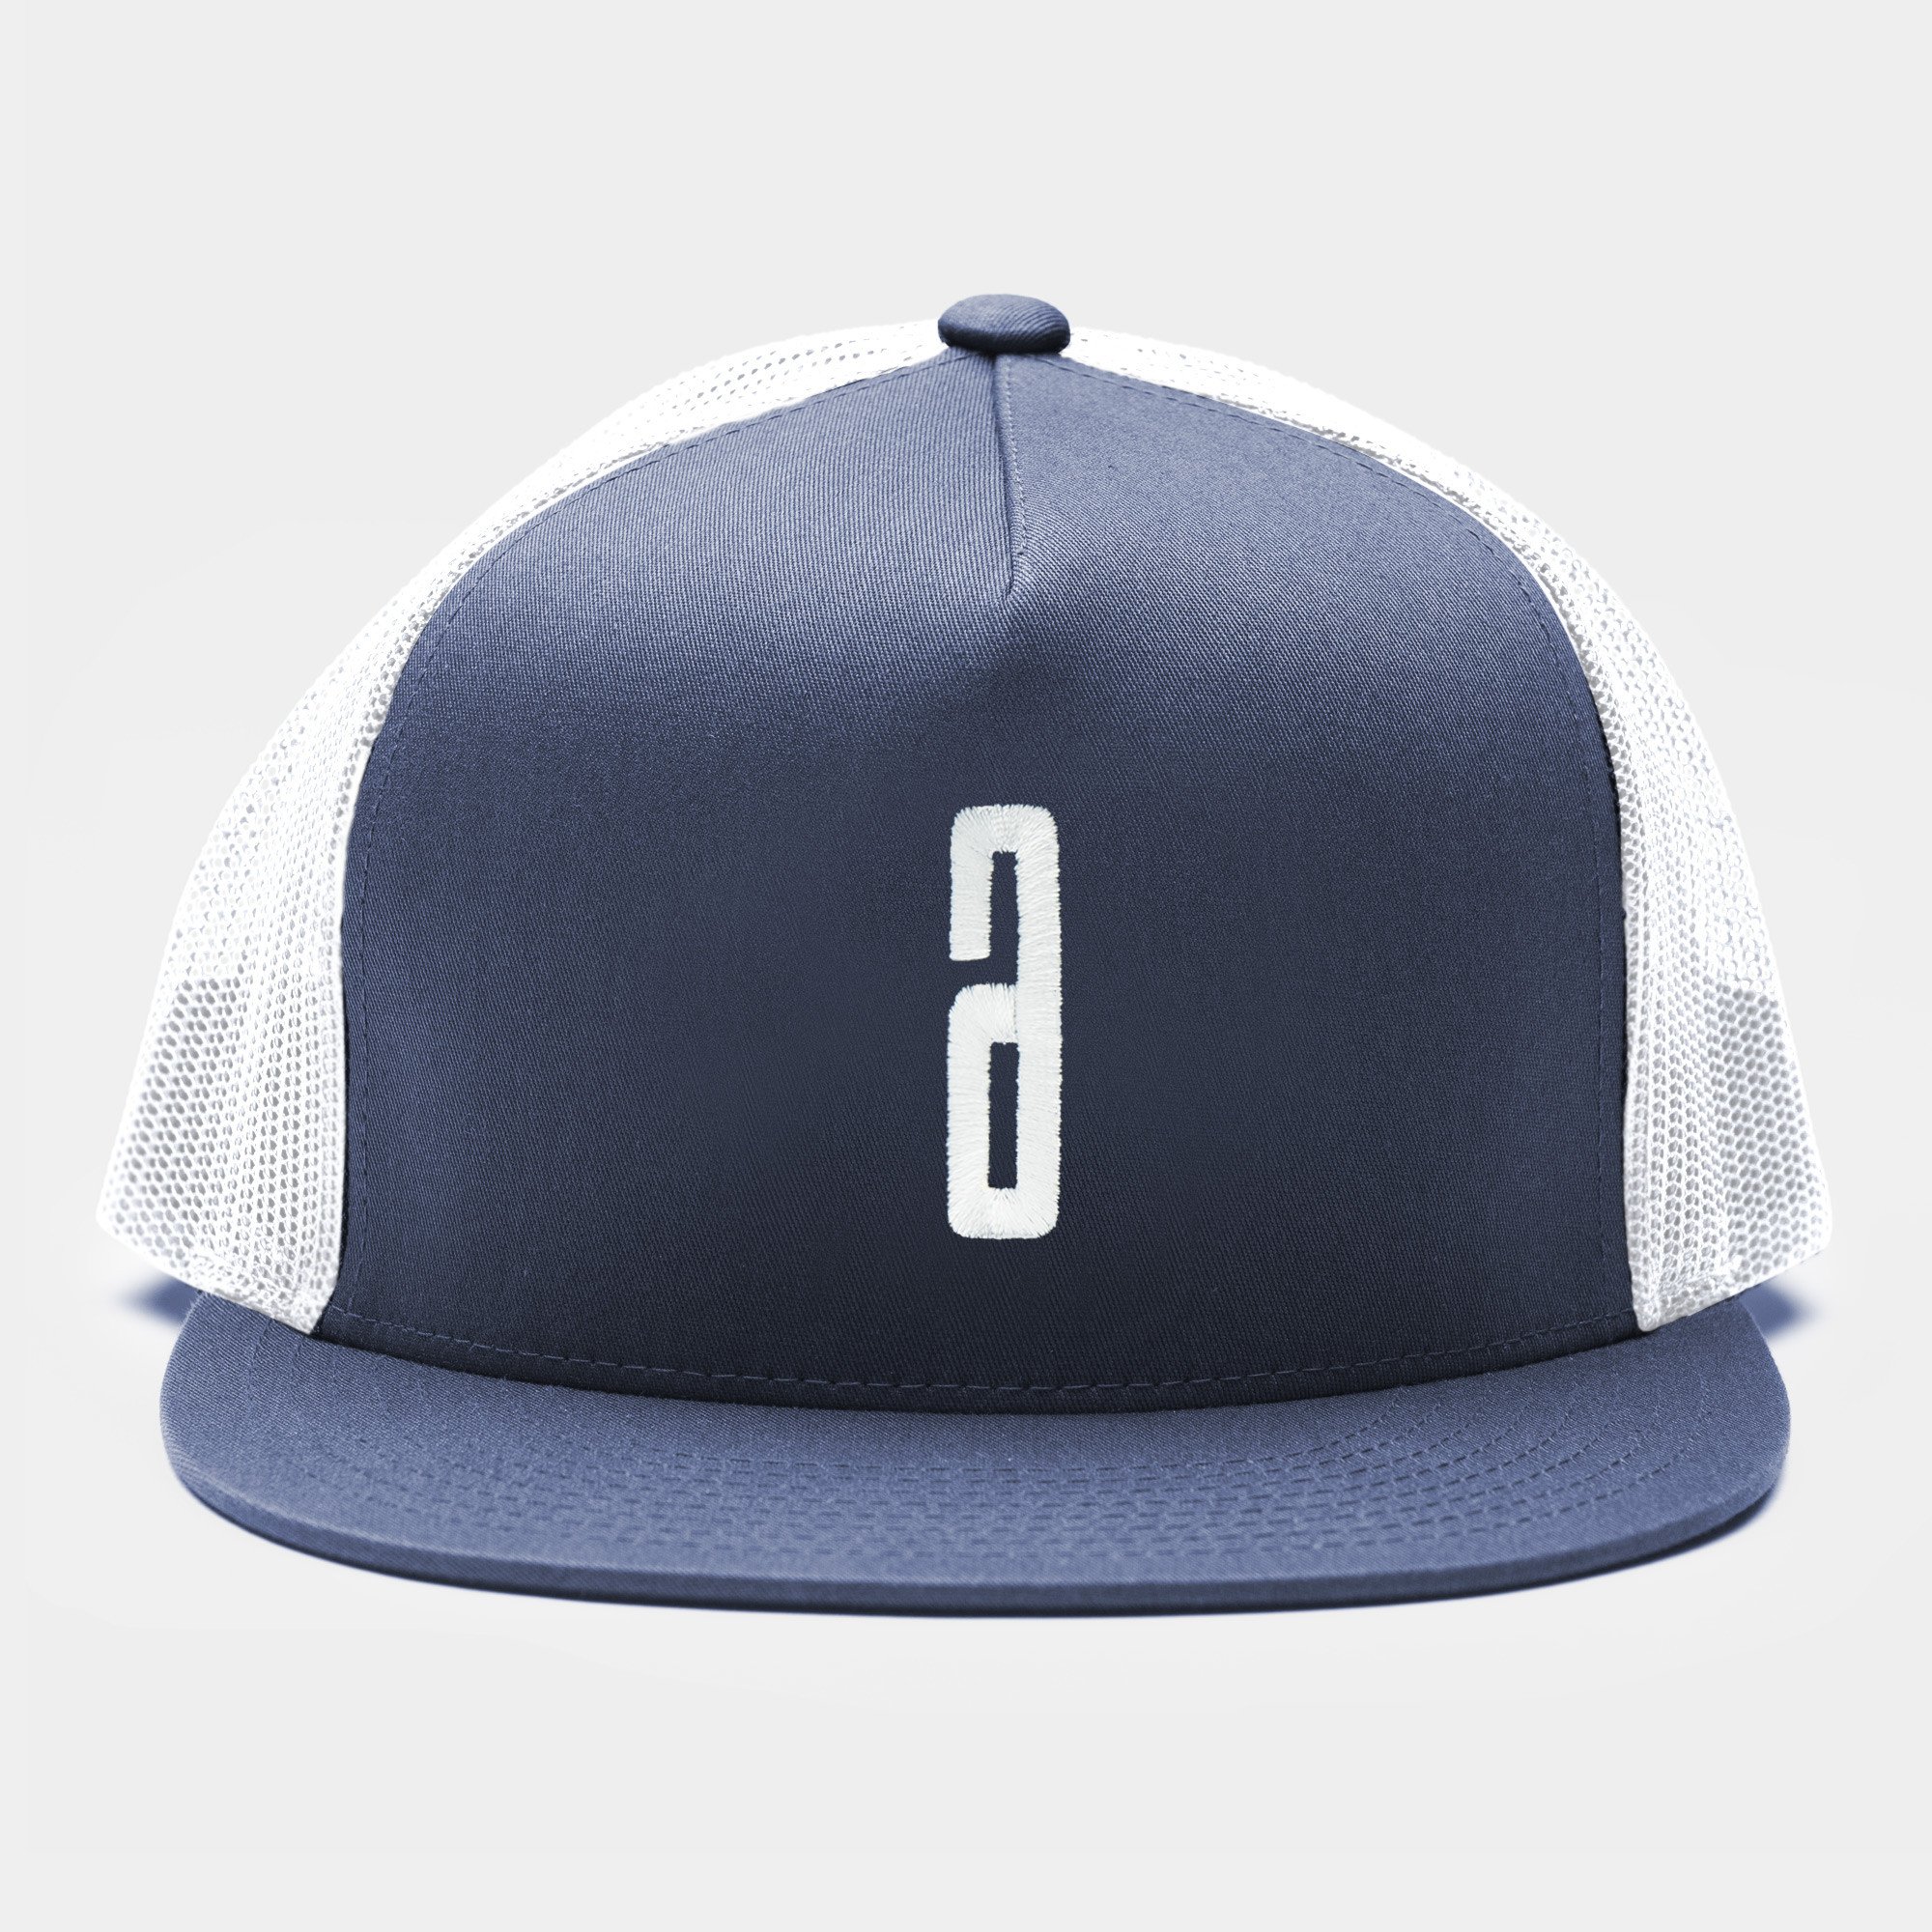 Trucker Cap Embroidery A  - Navy / White